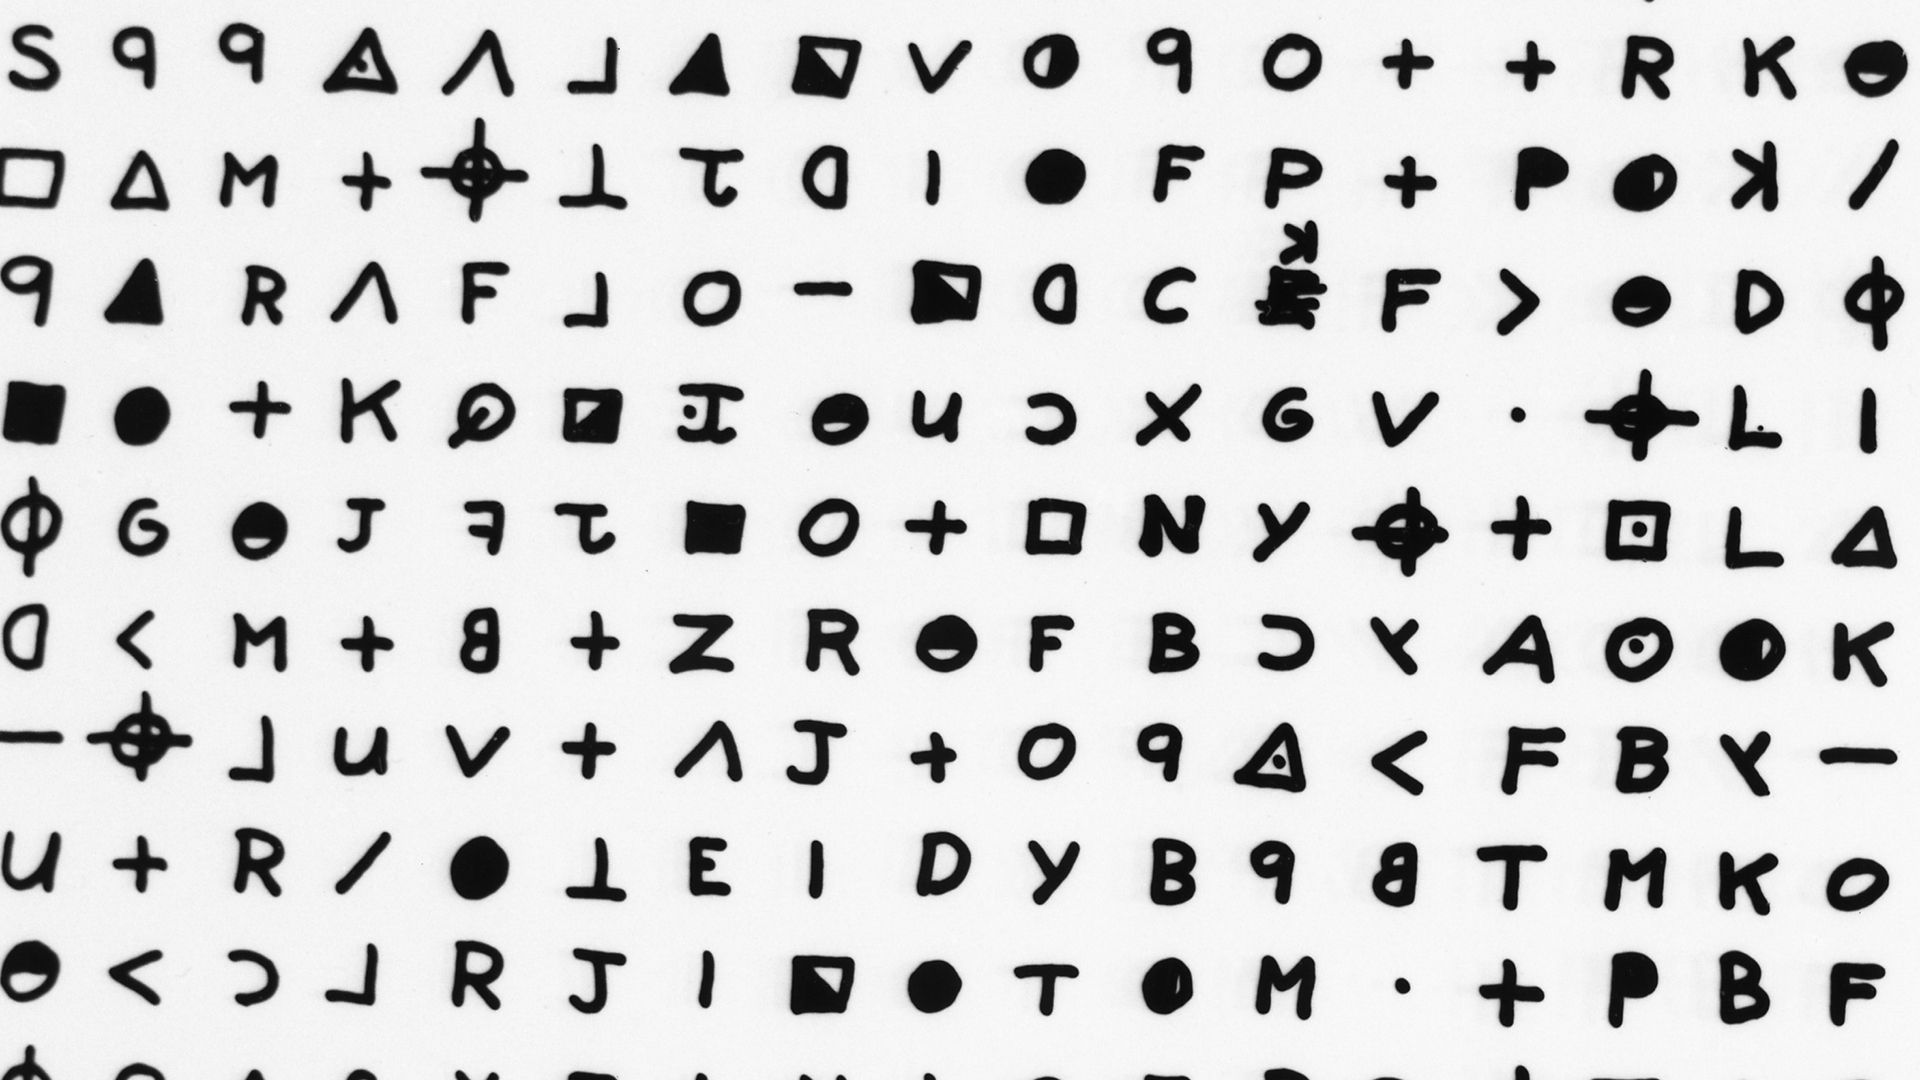 Why the Zodiac Killer Has Never Been Identified